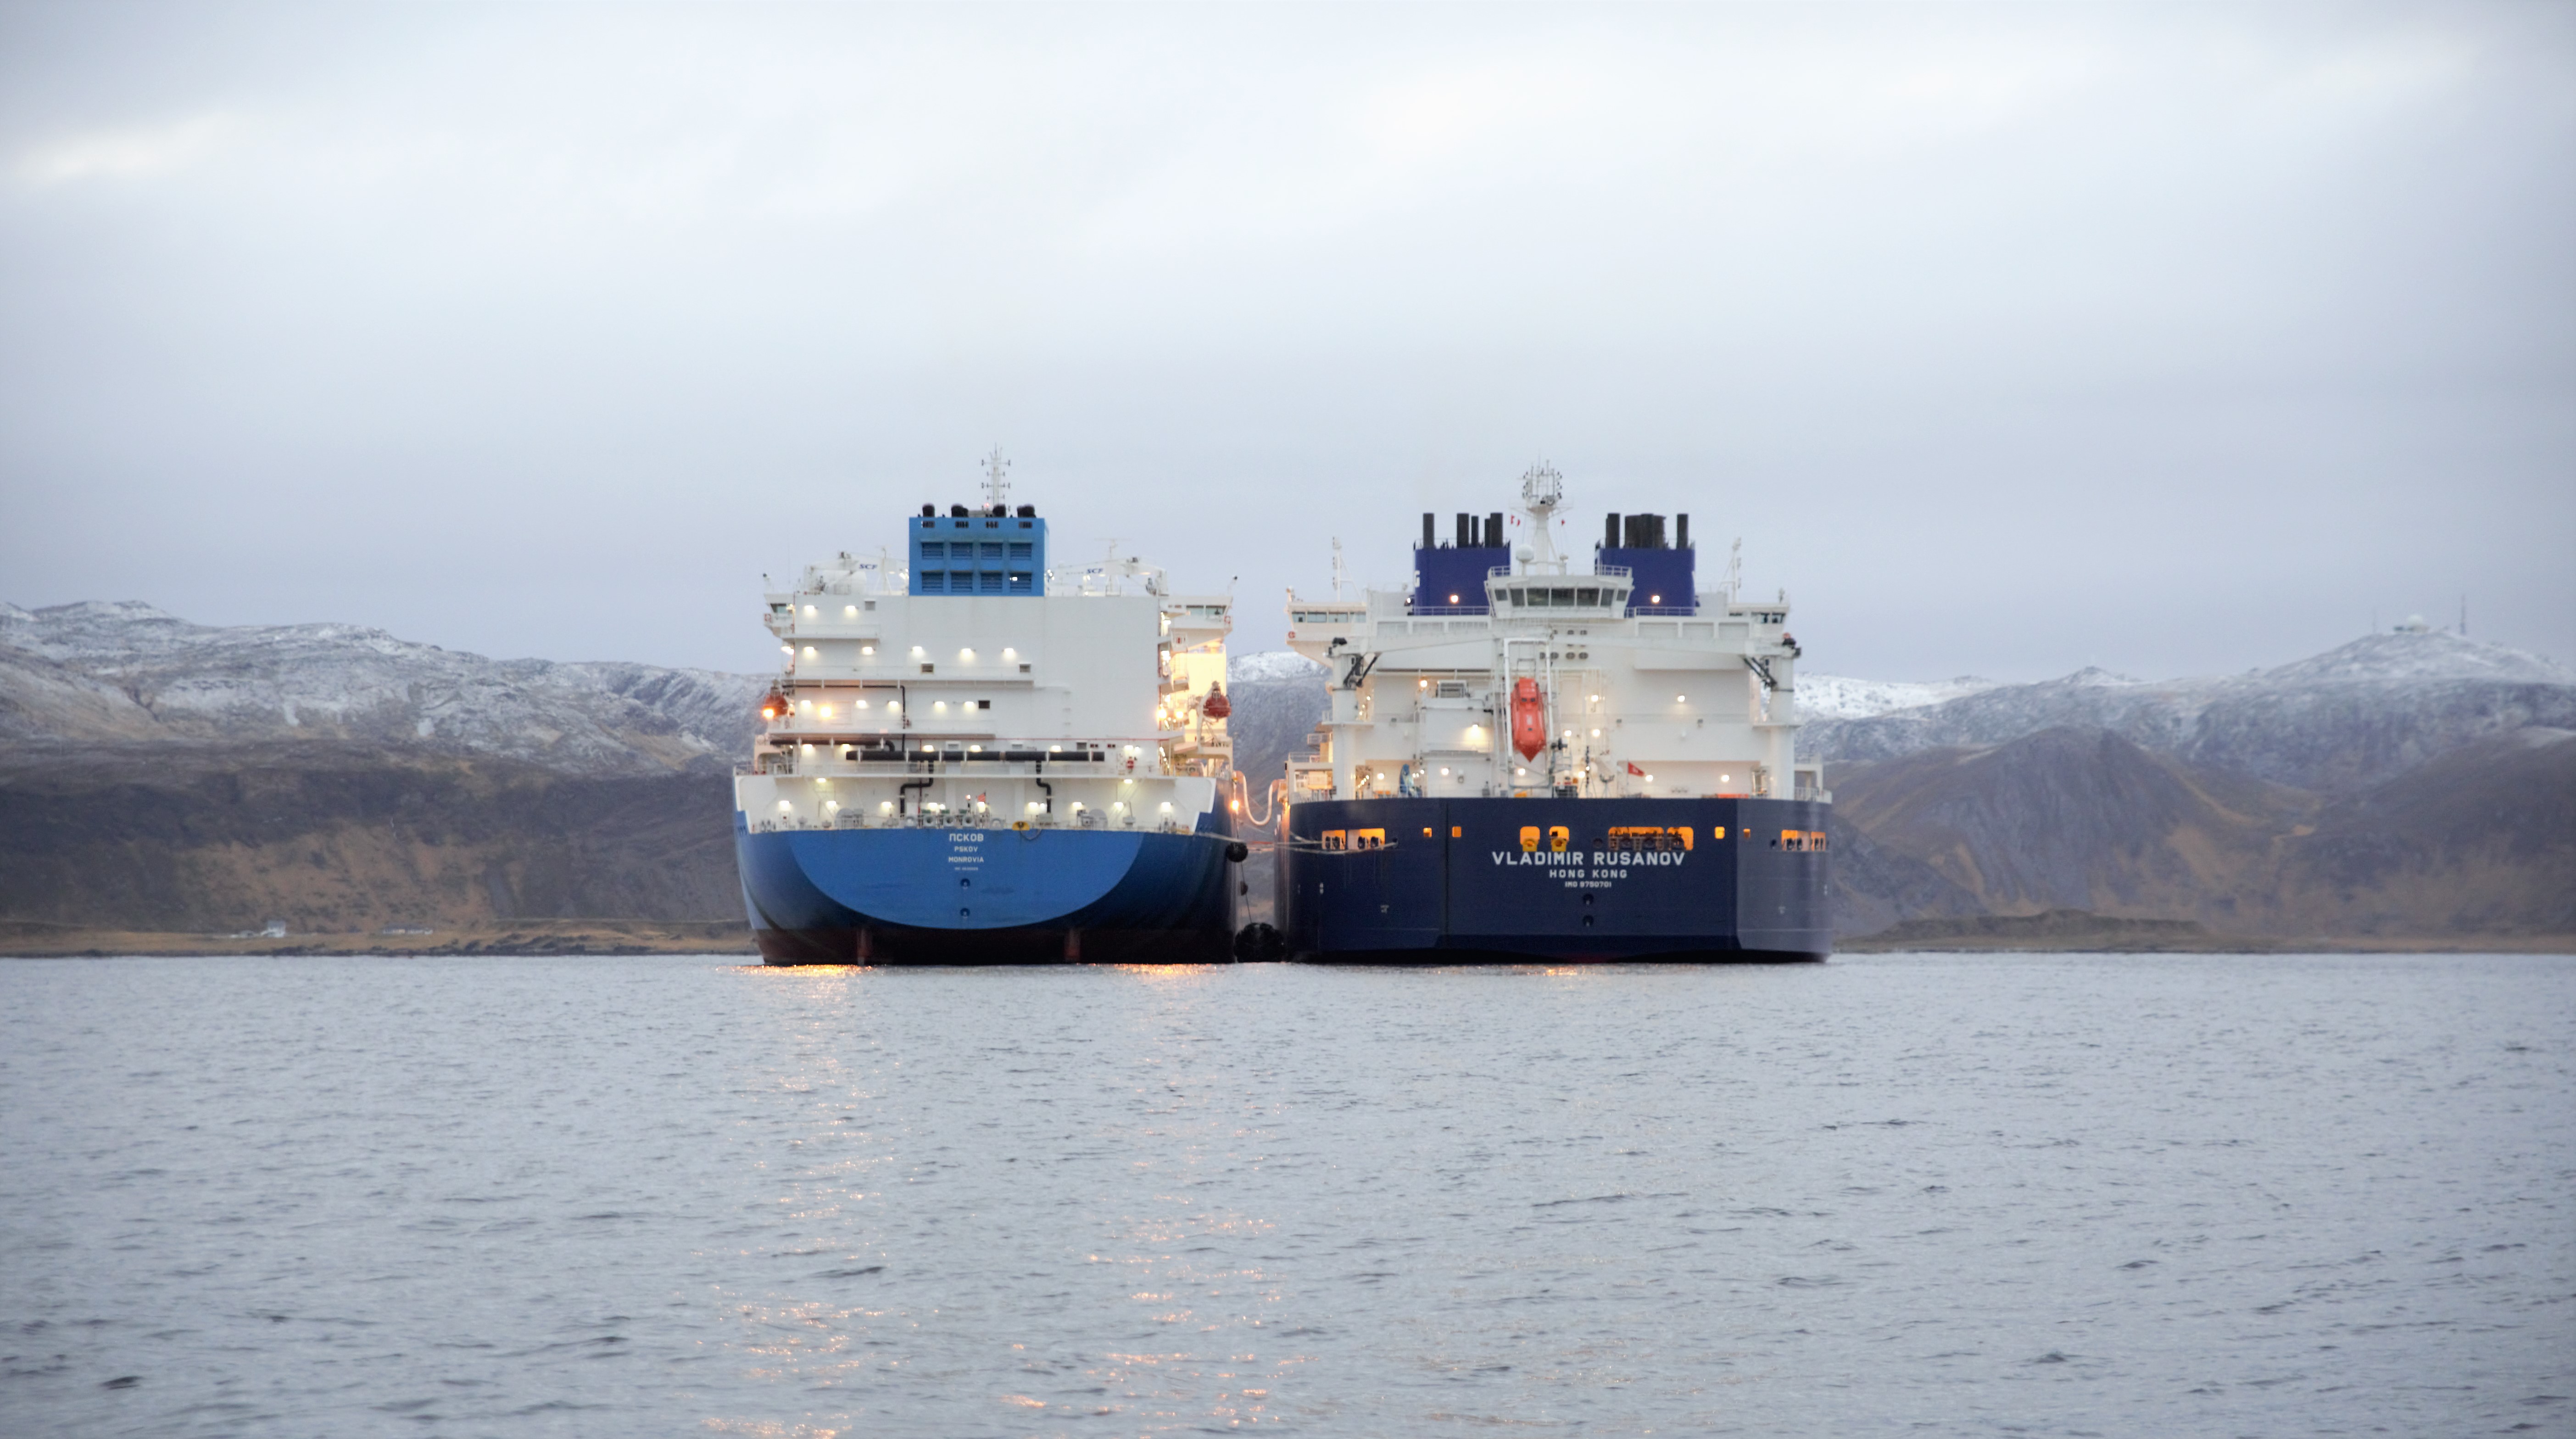 Millions of tons of Arctic LNG soon heading towards Murmansk